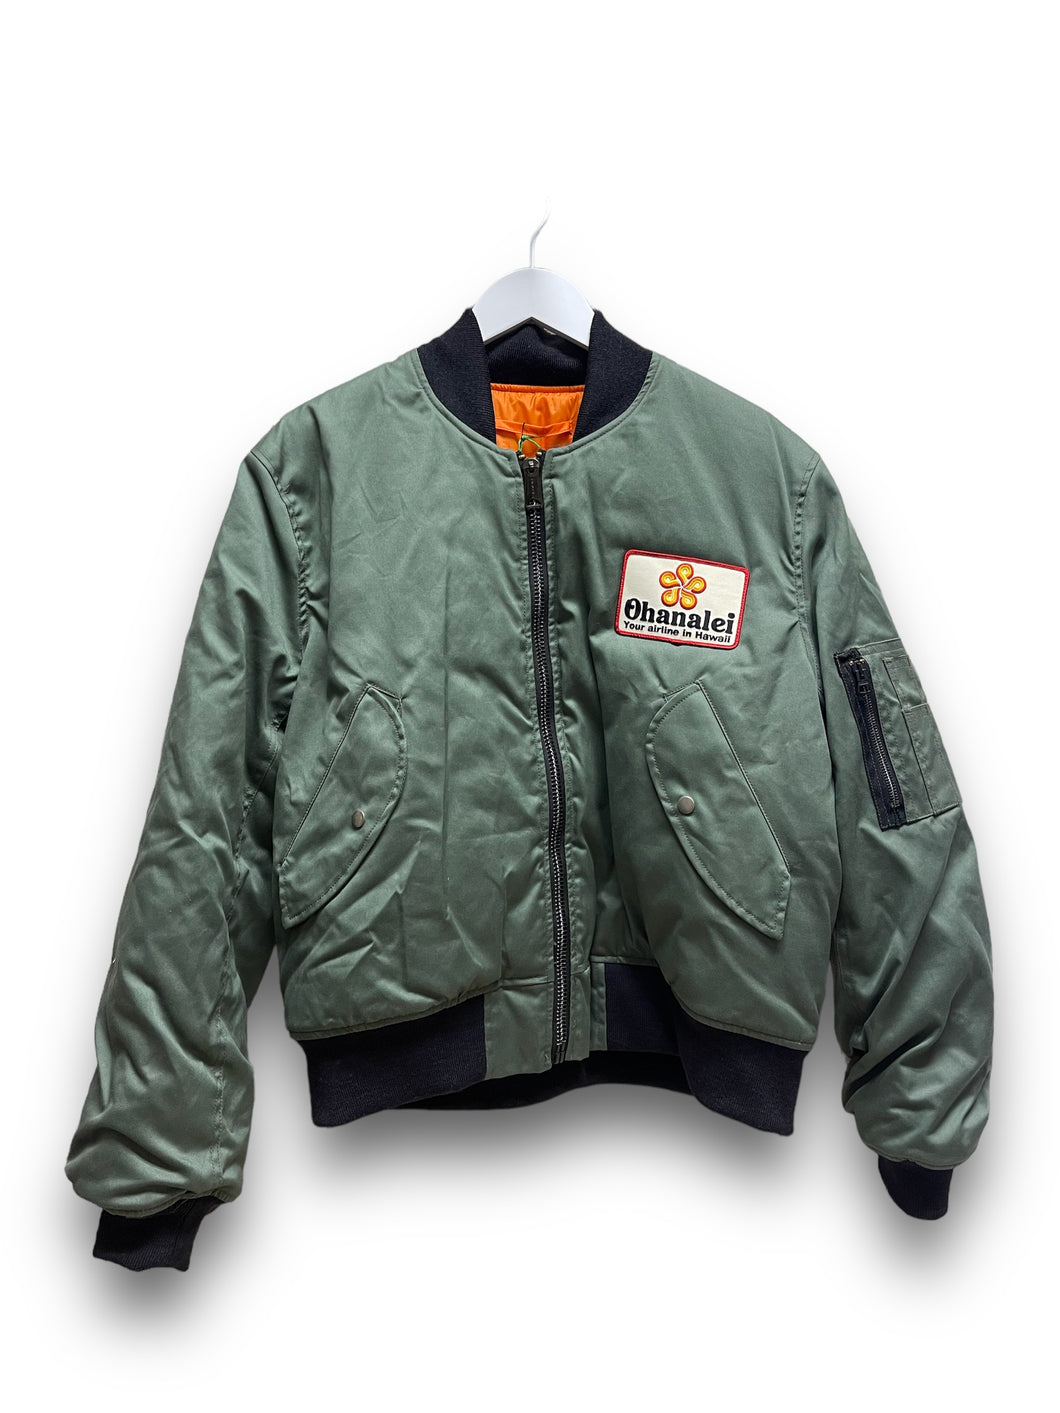 Ohanalei Vintage - Bomber Jacket with “Ohanalei Airlines Flower”Patch